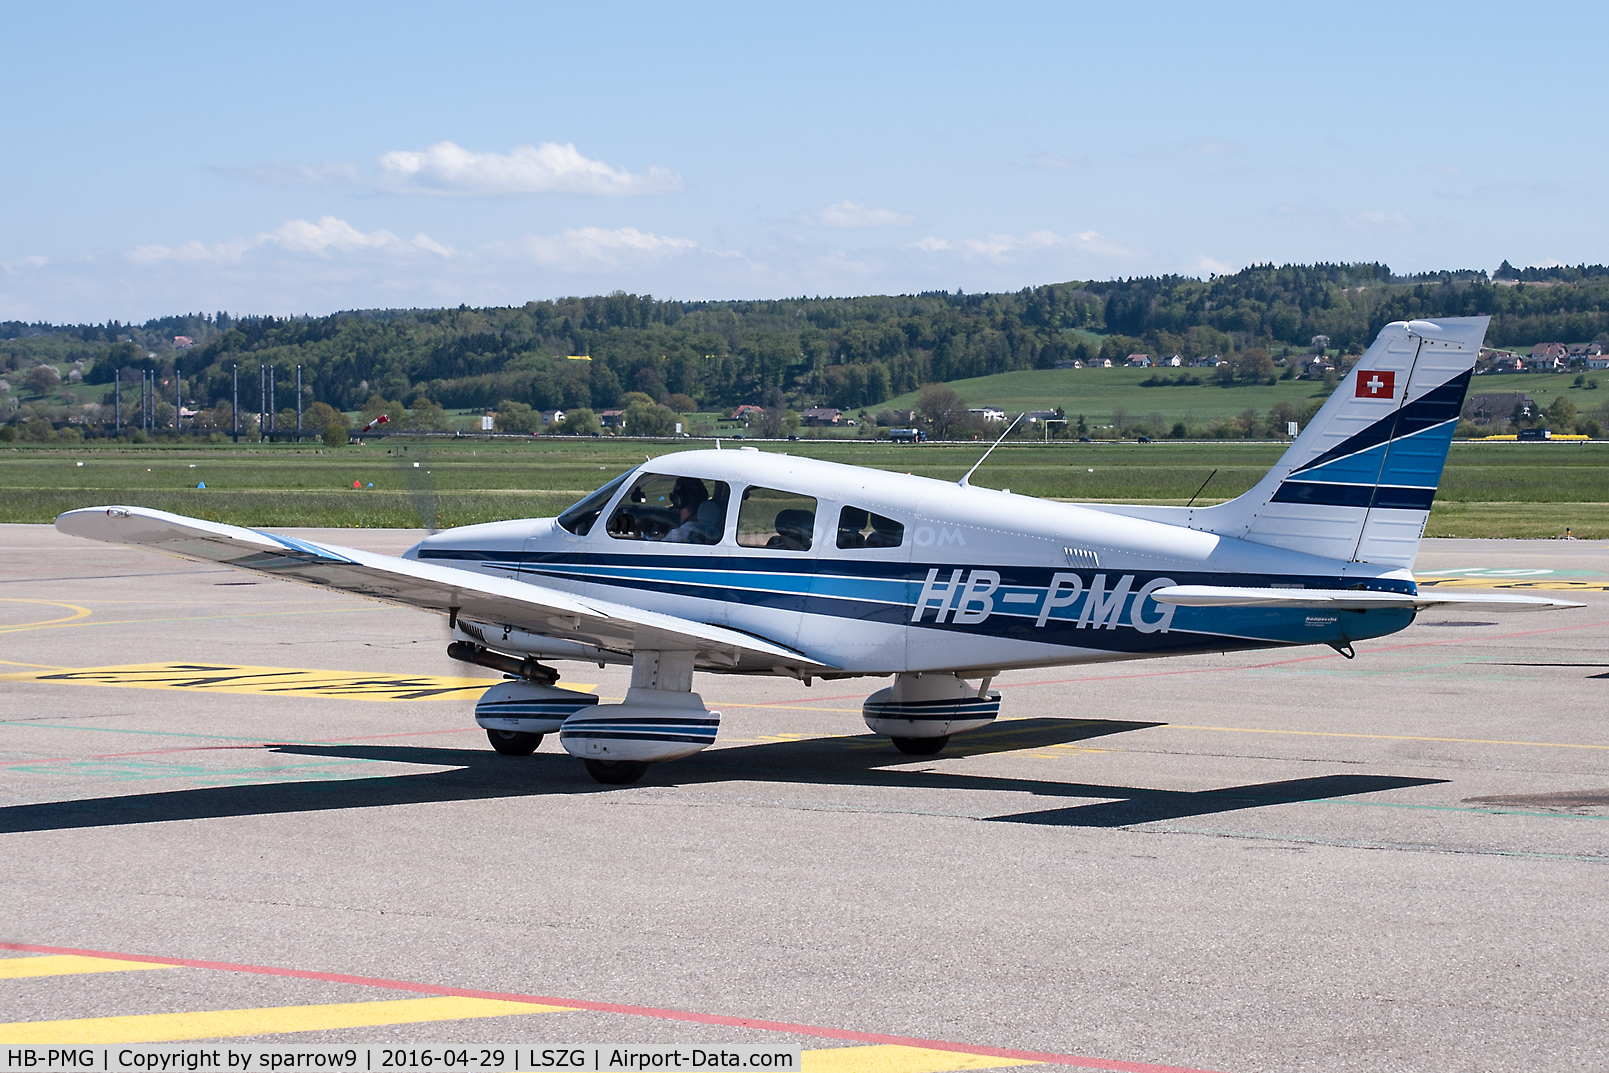 HB-PMG, 1989 Piper PA-28-181 Archer II C/N 2890109, At Grenchen. HB-registered since 1989-03-15